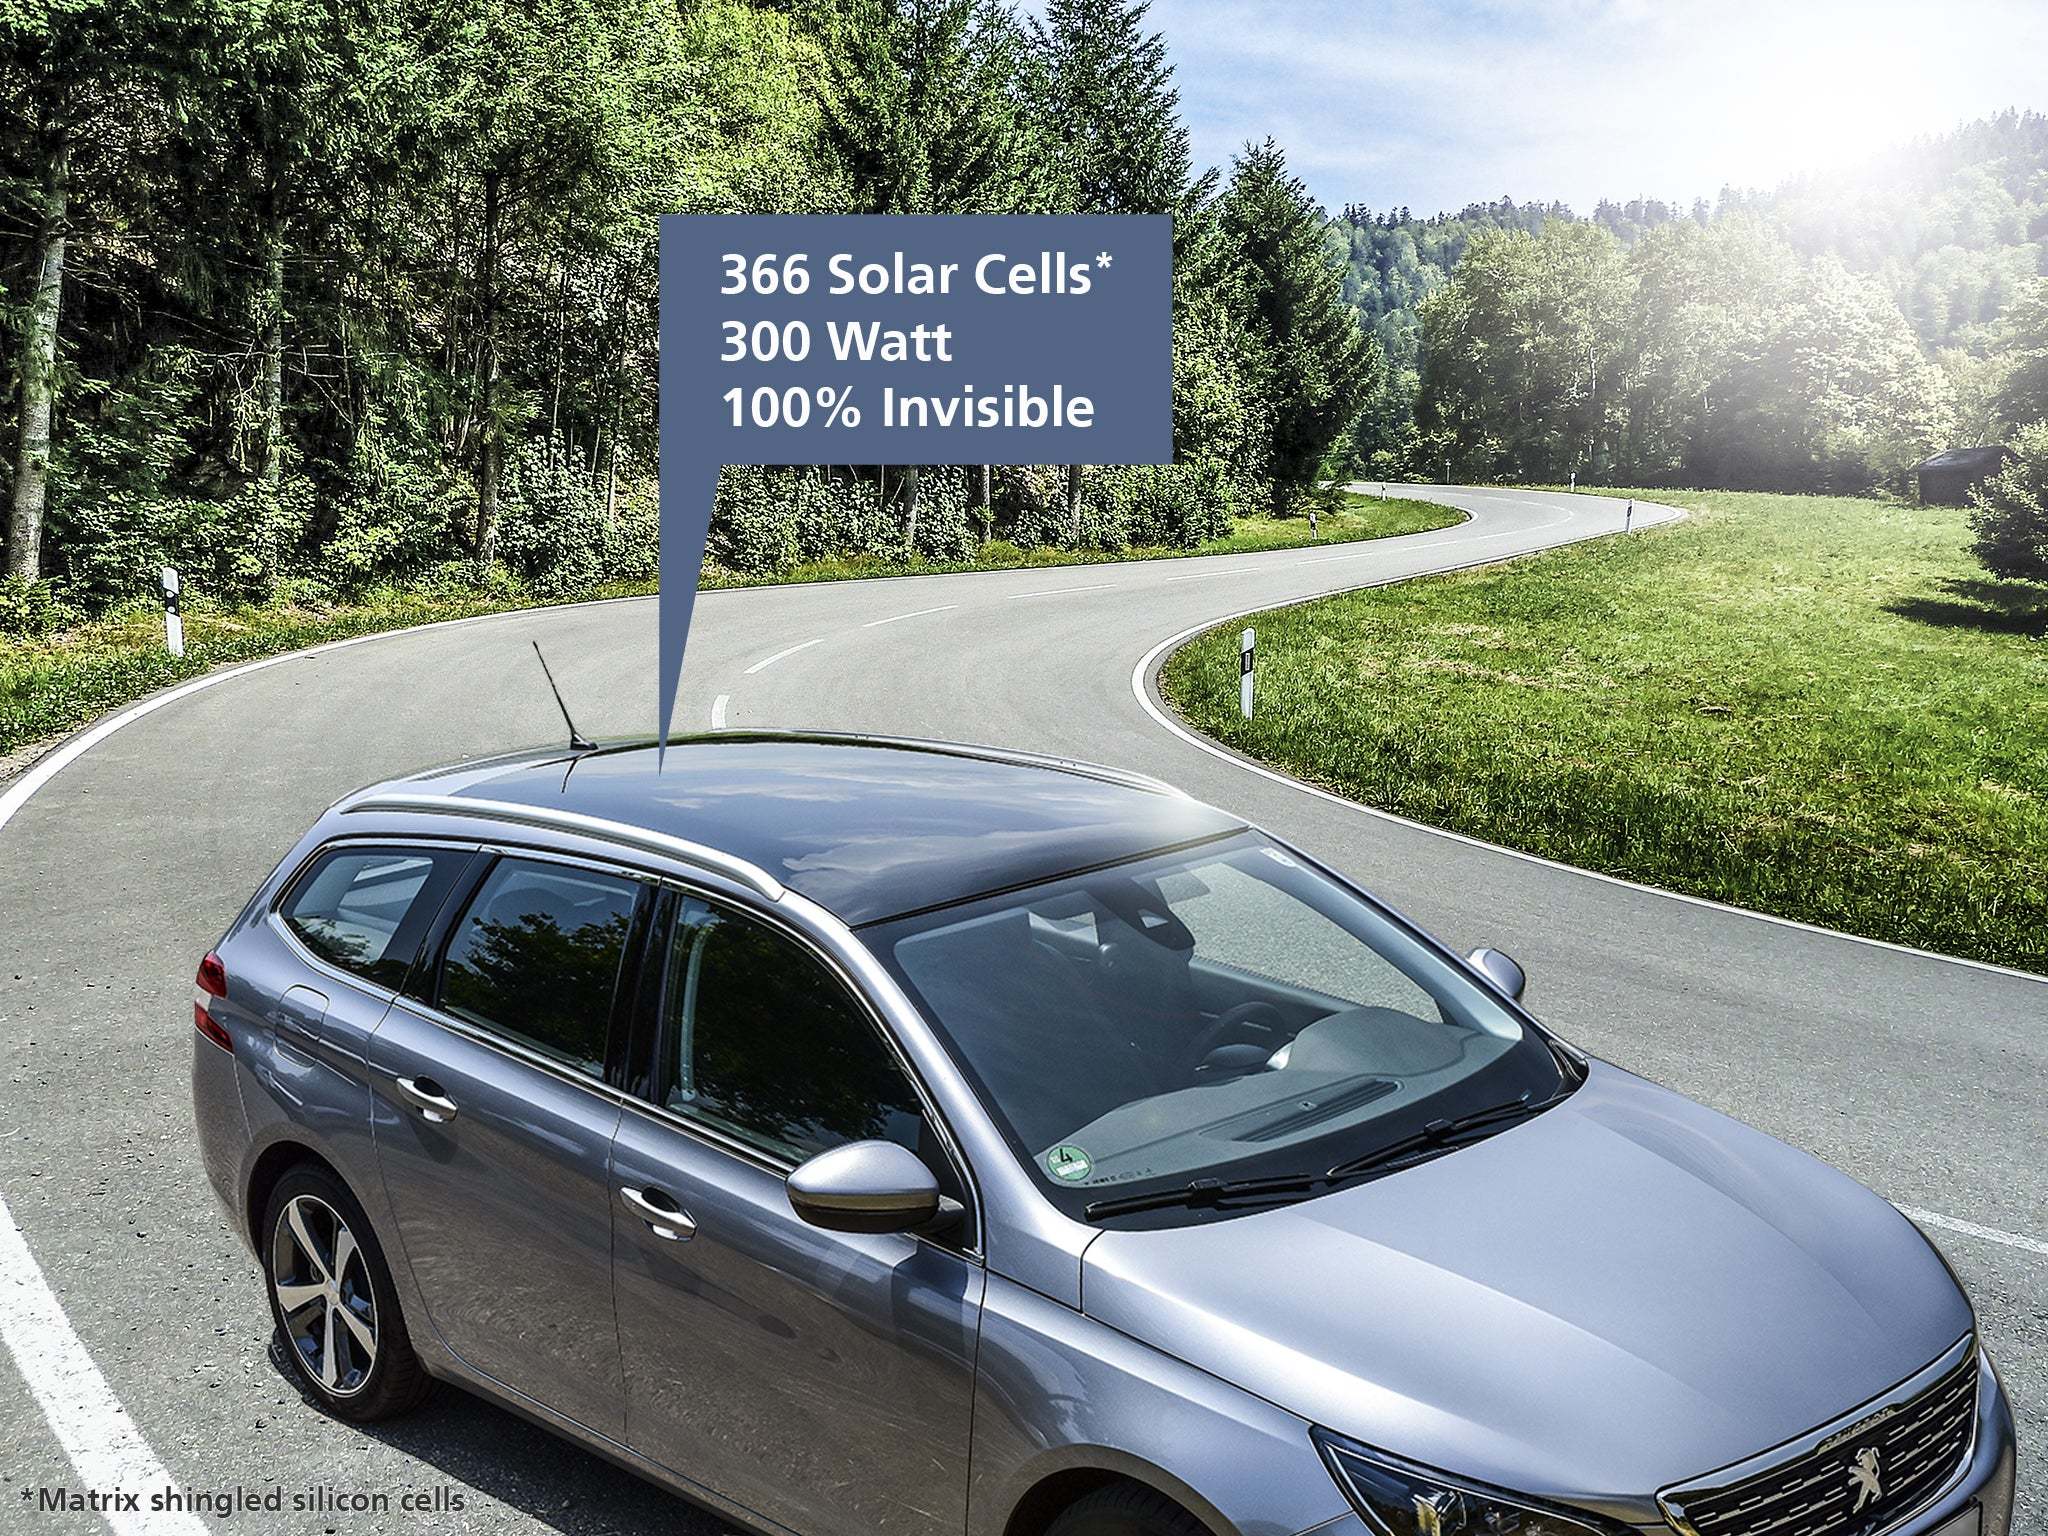 solar roof for vehicles